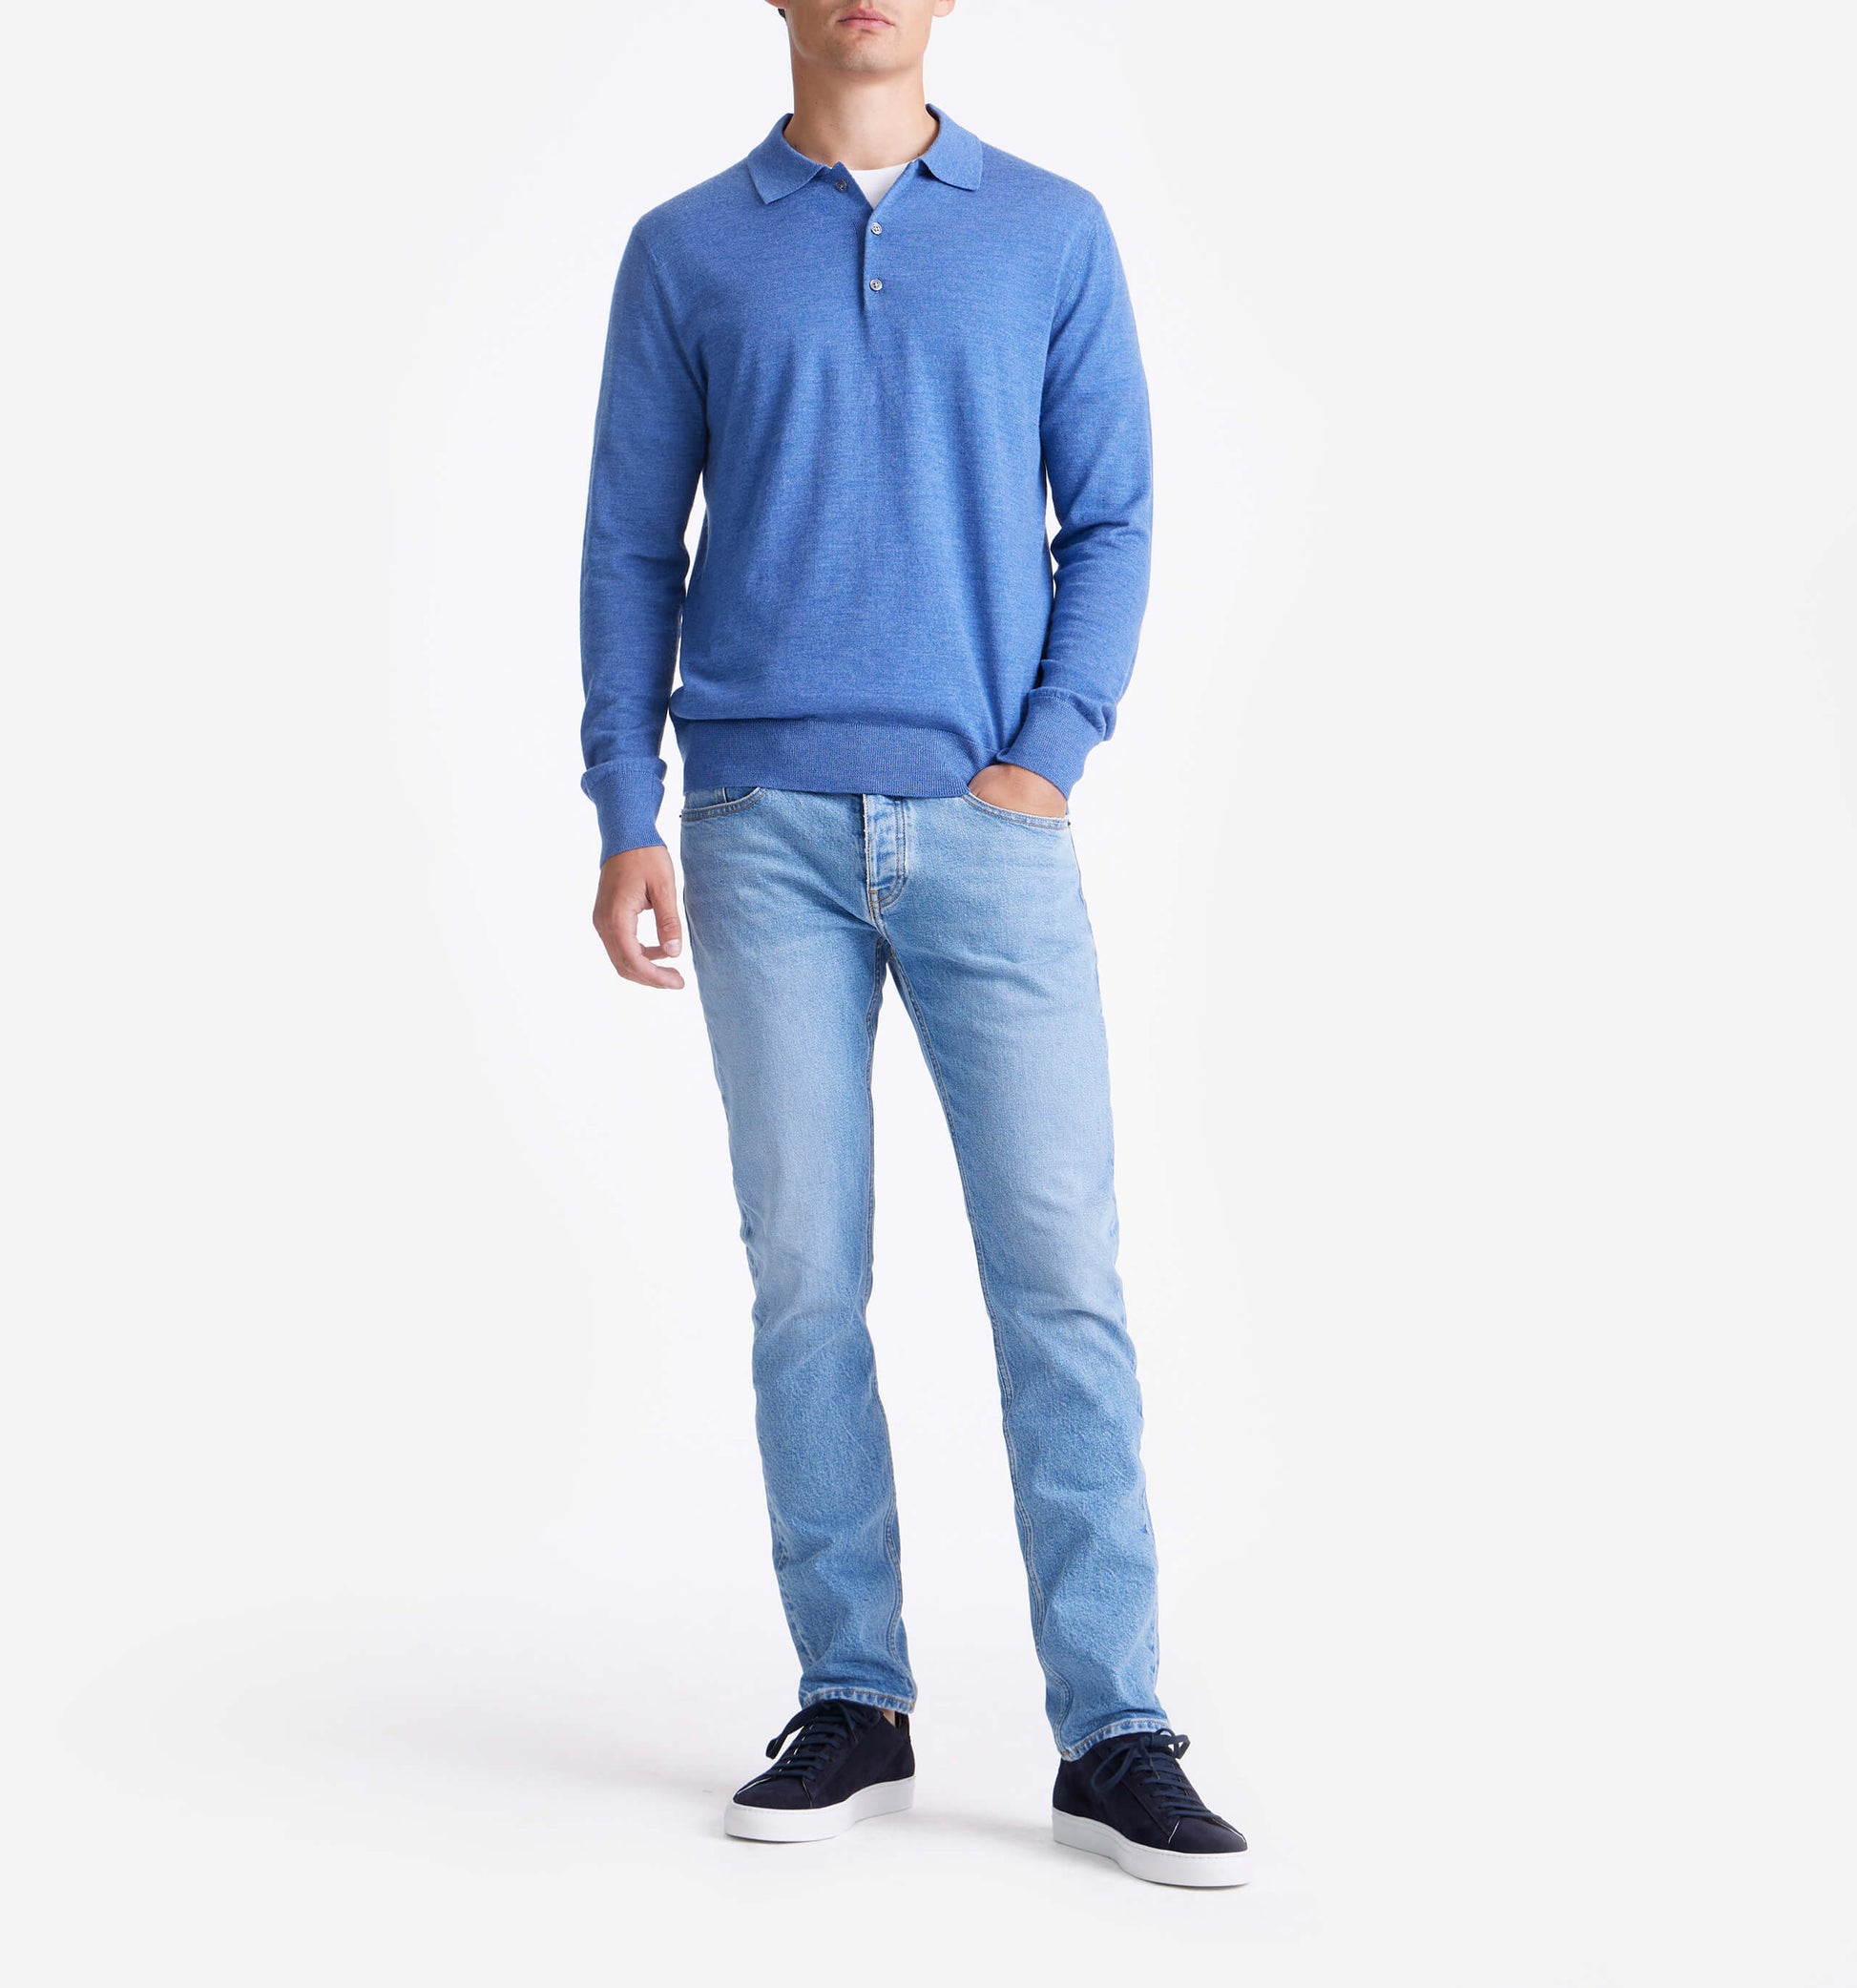 The Robert - Merino Wool Polo In Blue From King Essentials